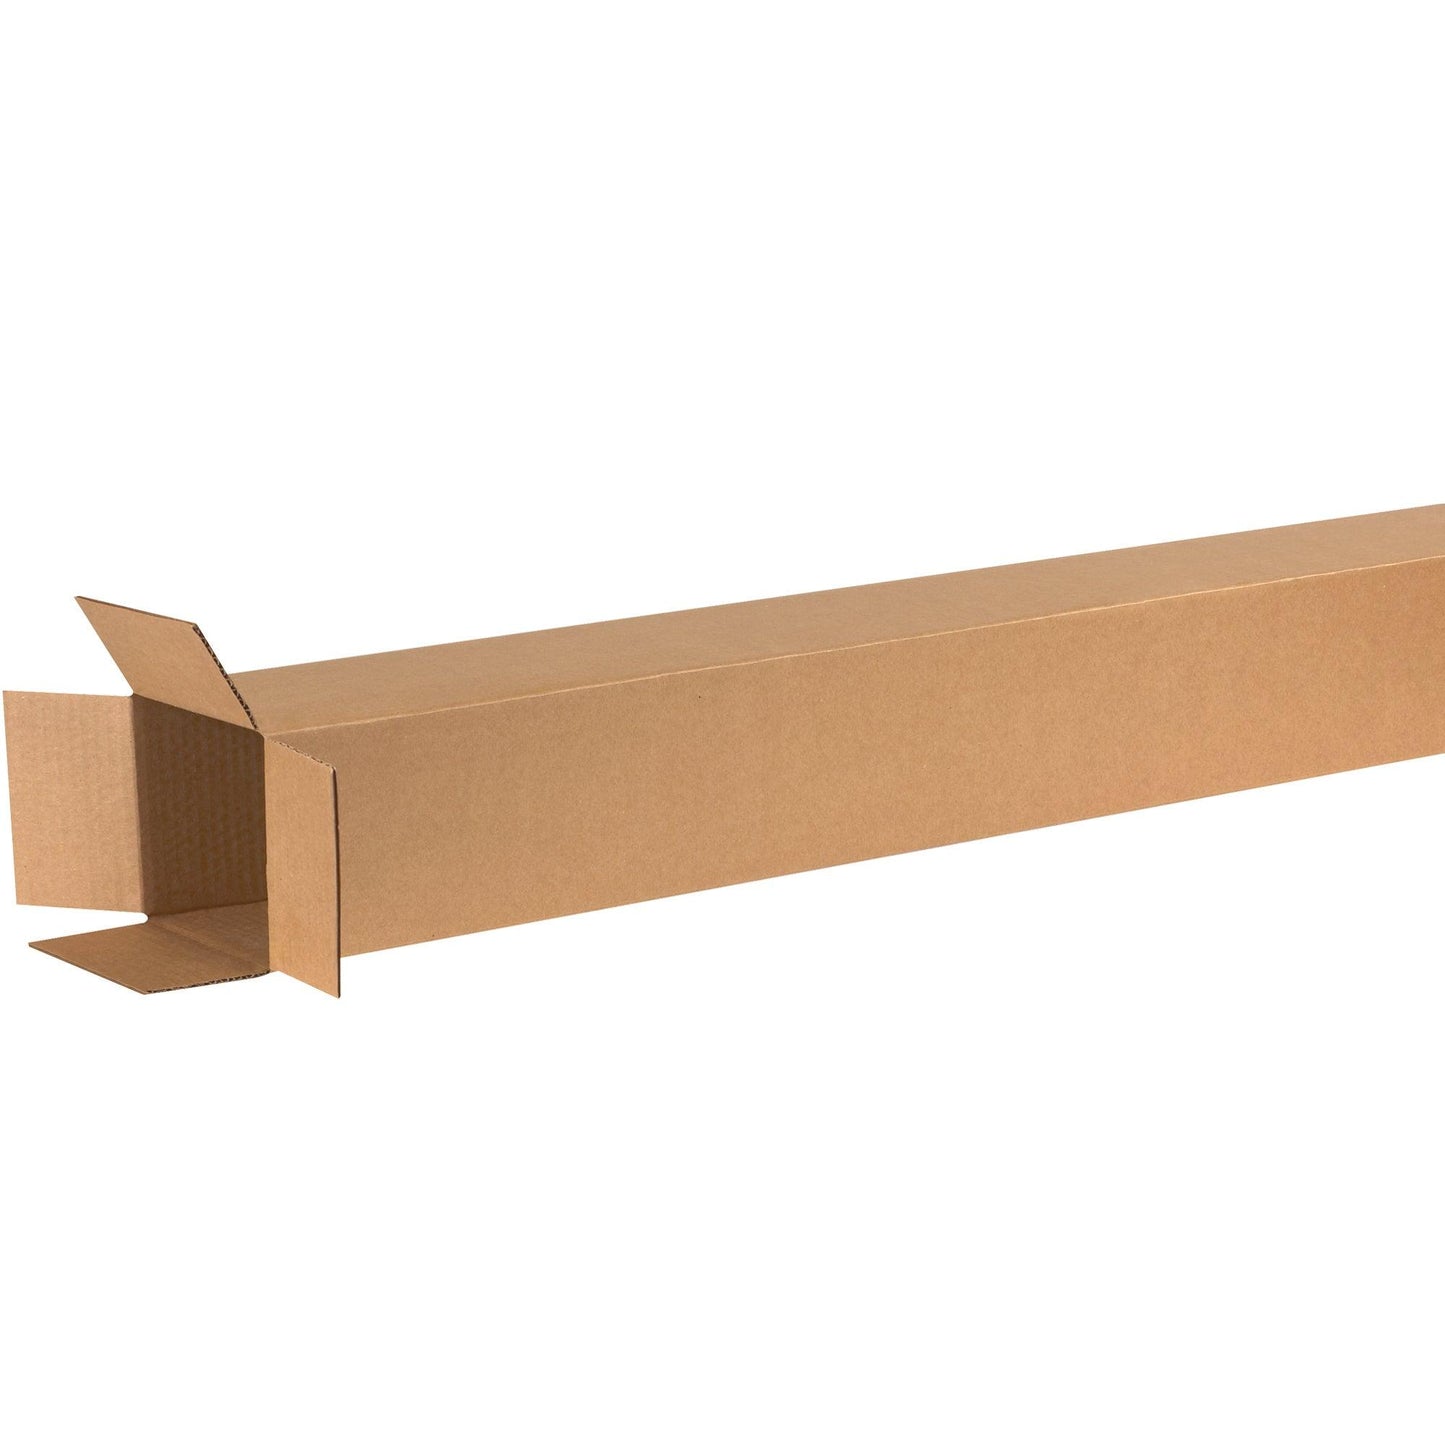 6 x 6 x 72" Tall Corrugated Boxes - 6672